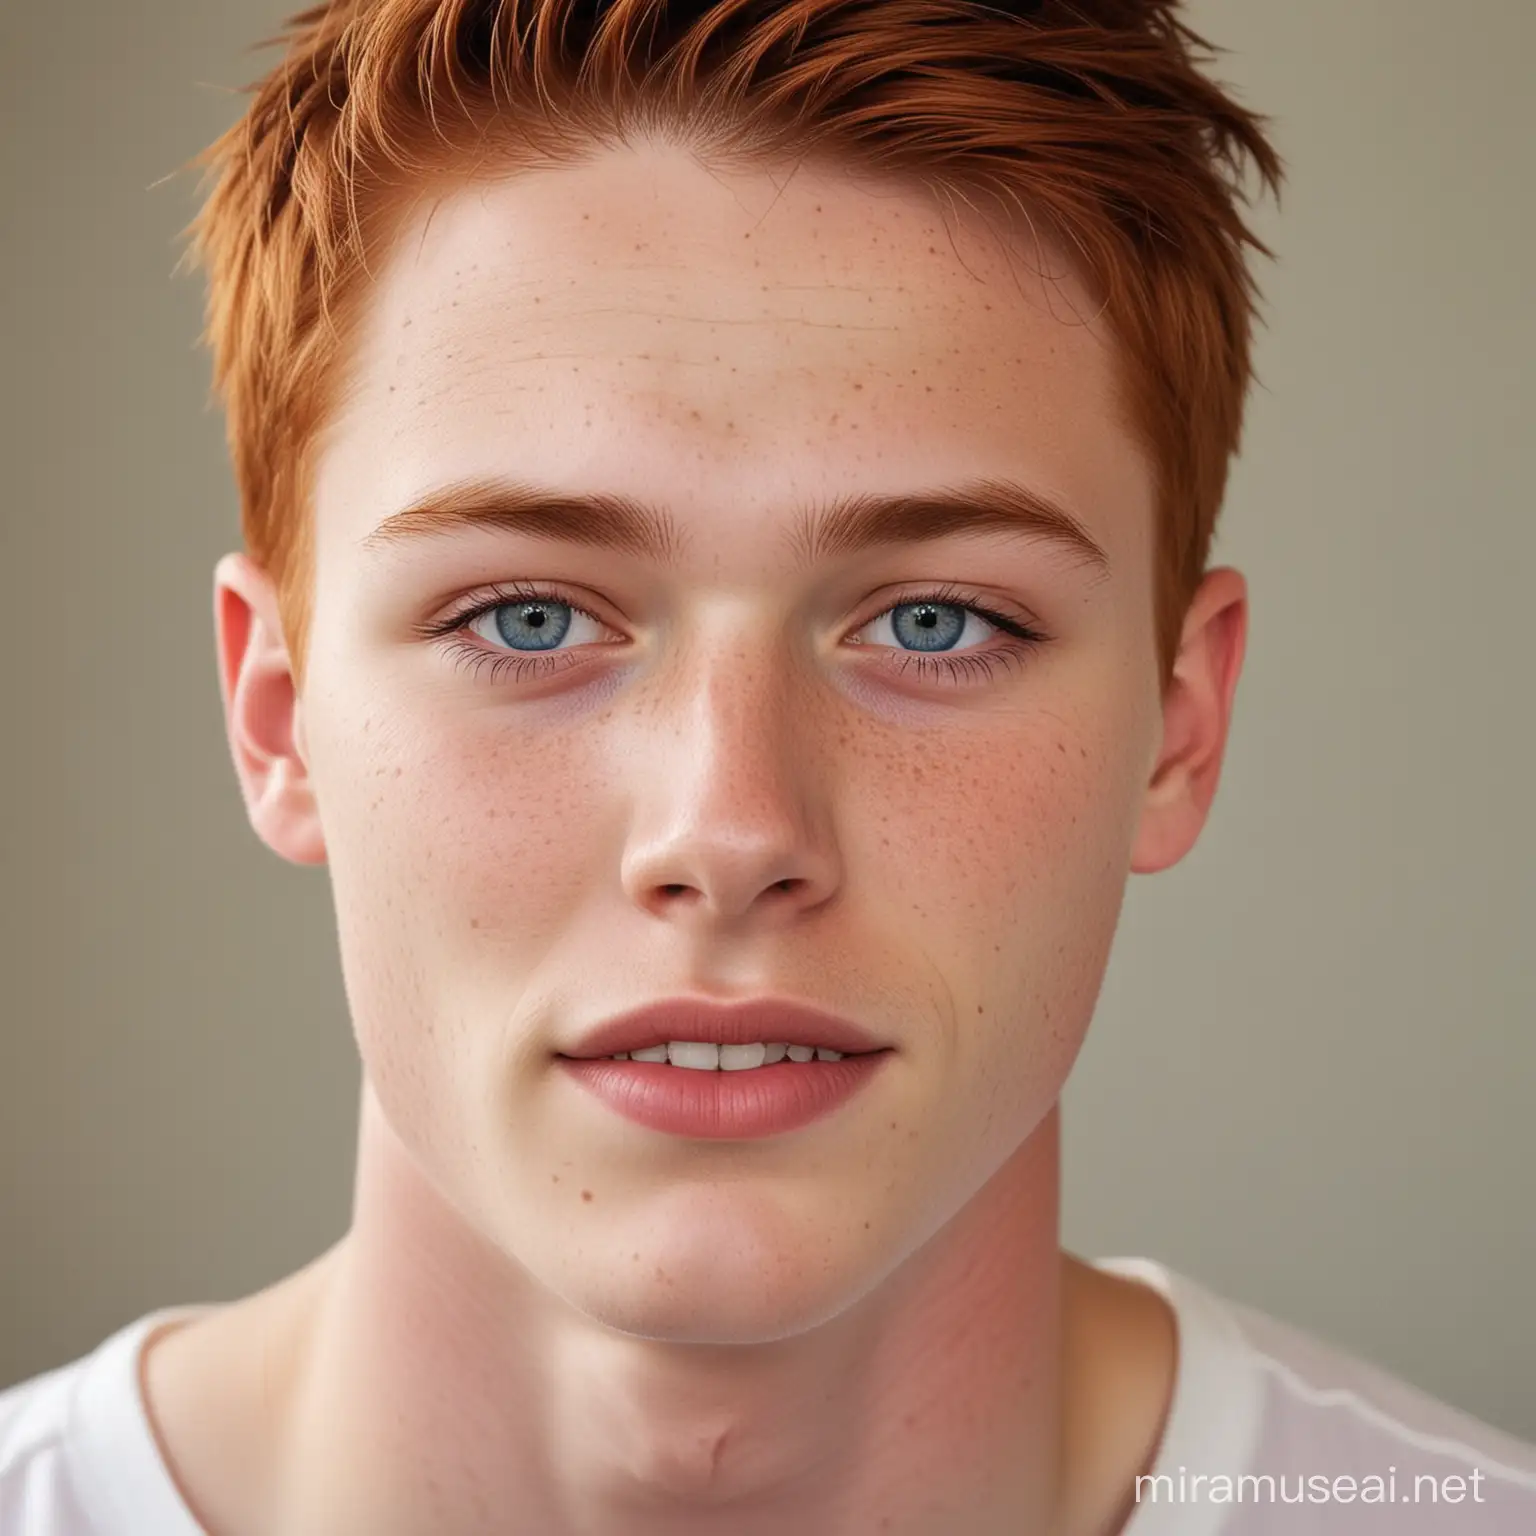 Teenage Boy with Red Hair and Sky Blue Eyes